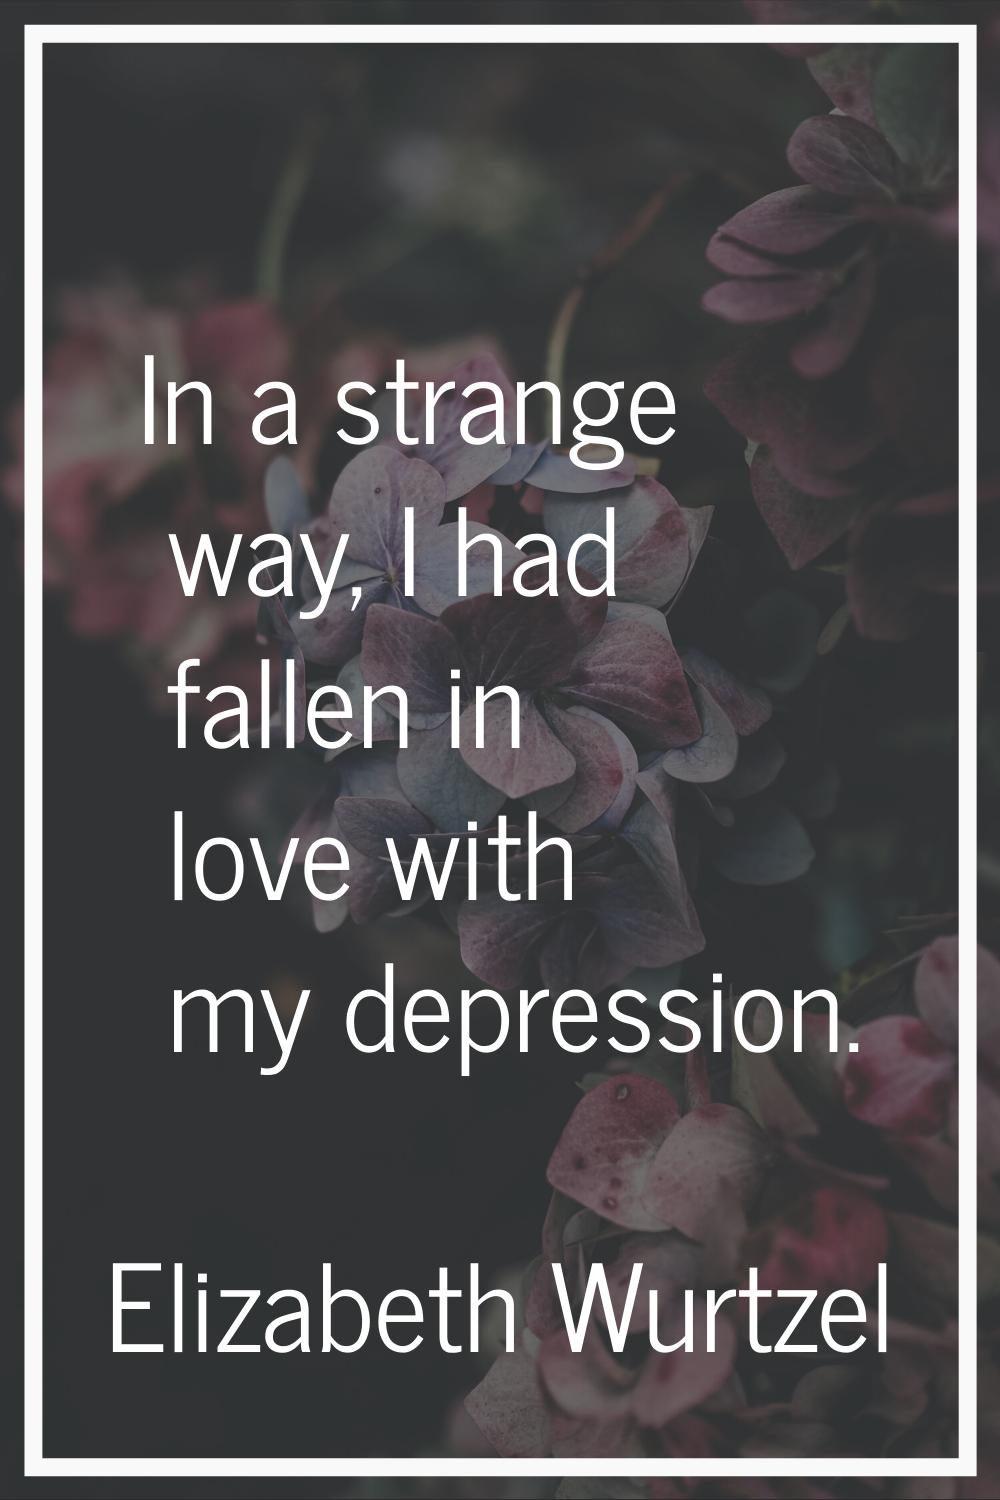 In a strange way, I had fallen in love with my depression.